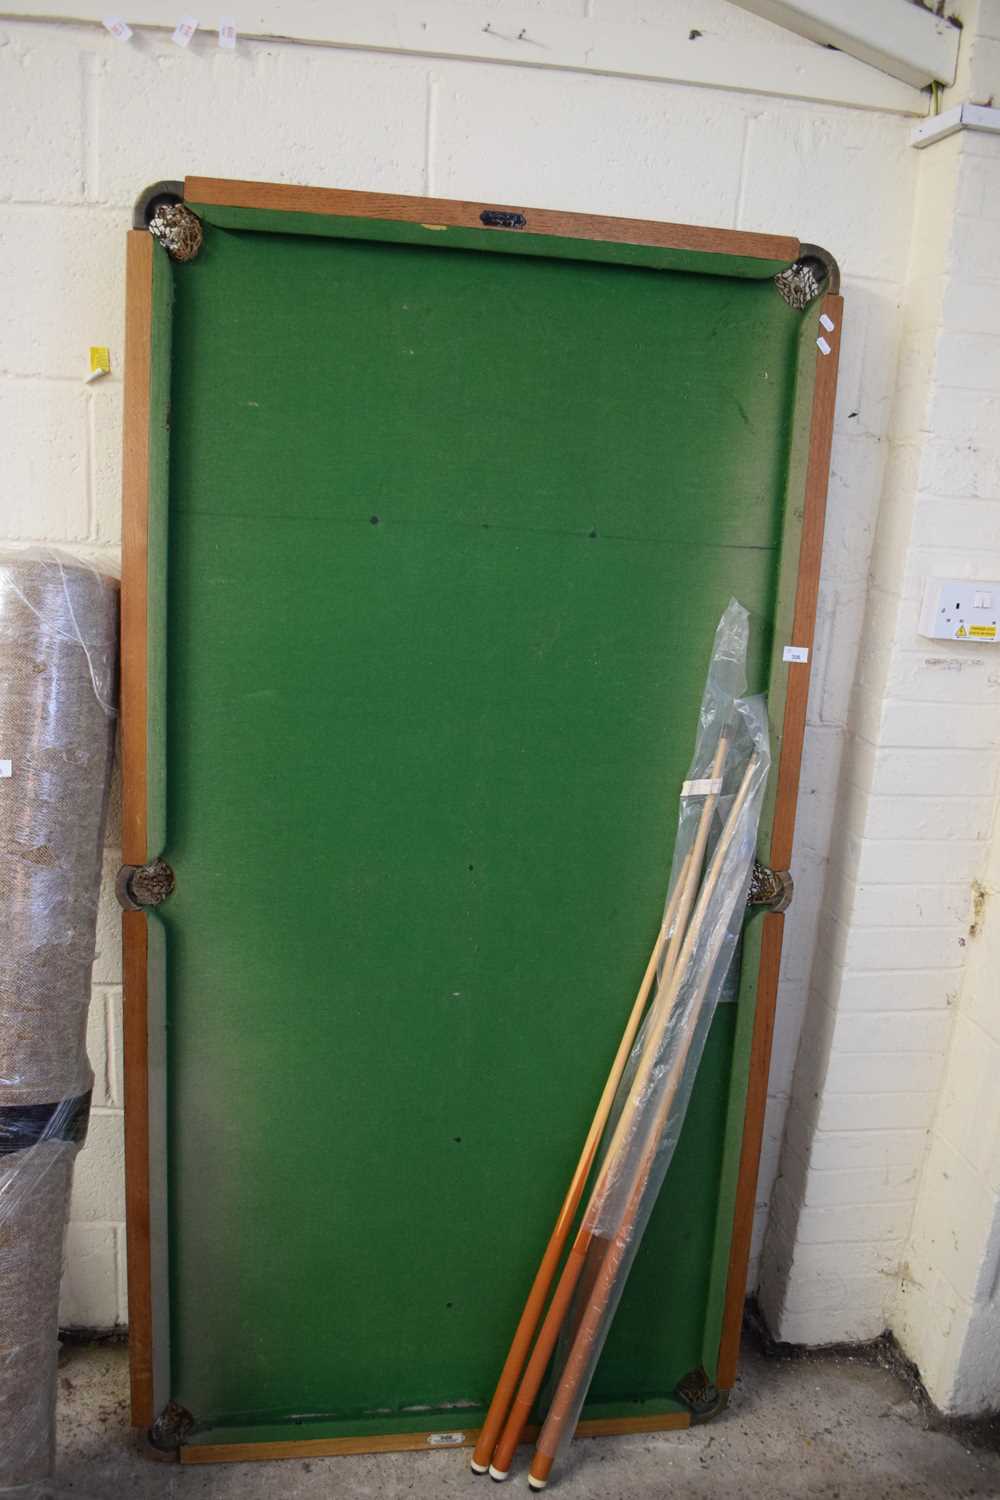 Lot 306 - VINTAGE POOL TABLE WITH FOLDING LEGS